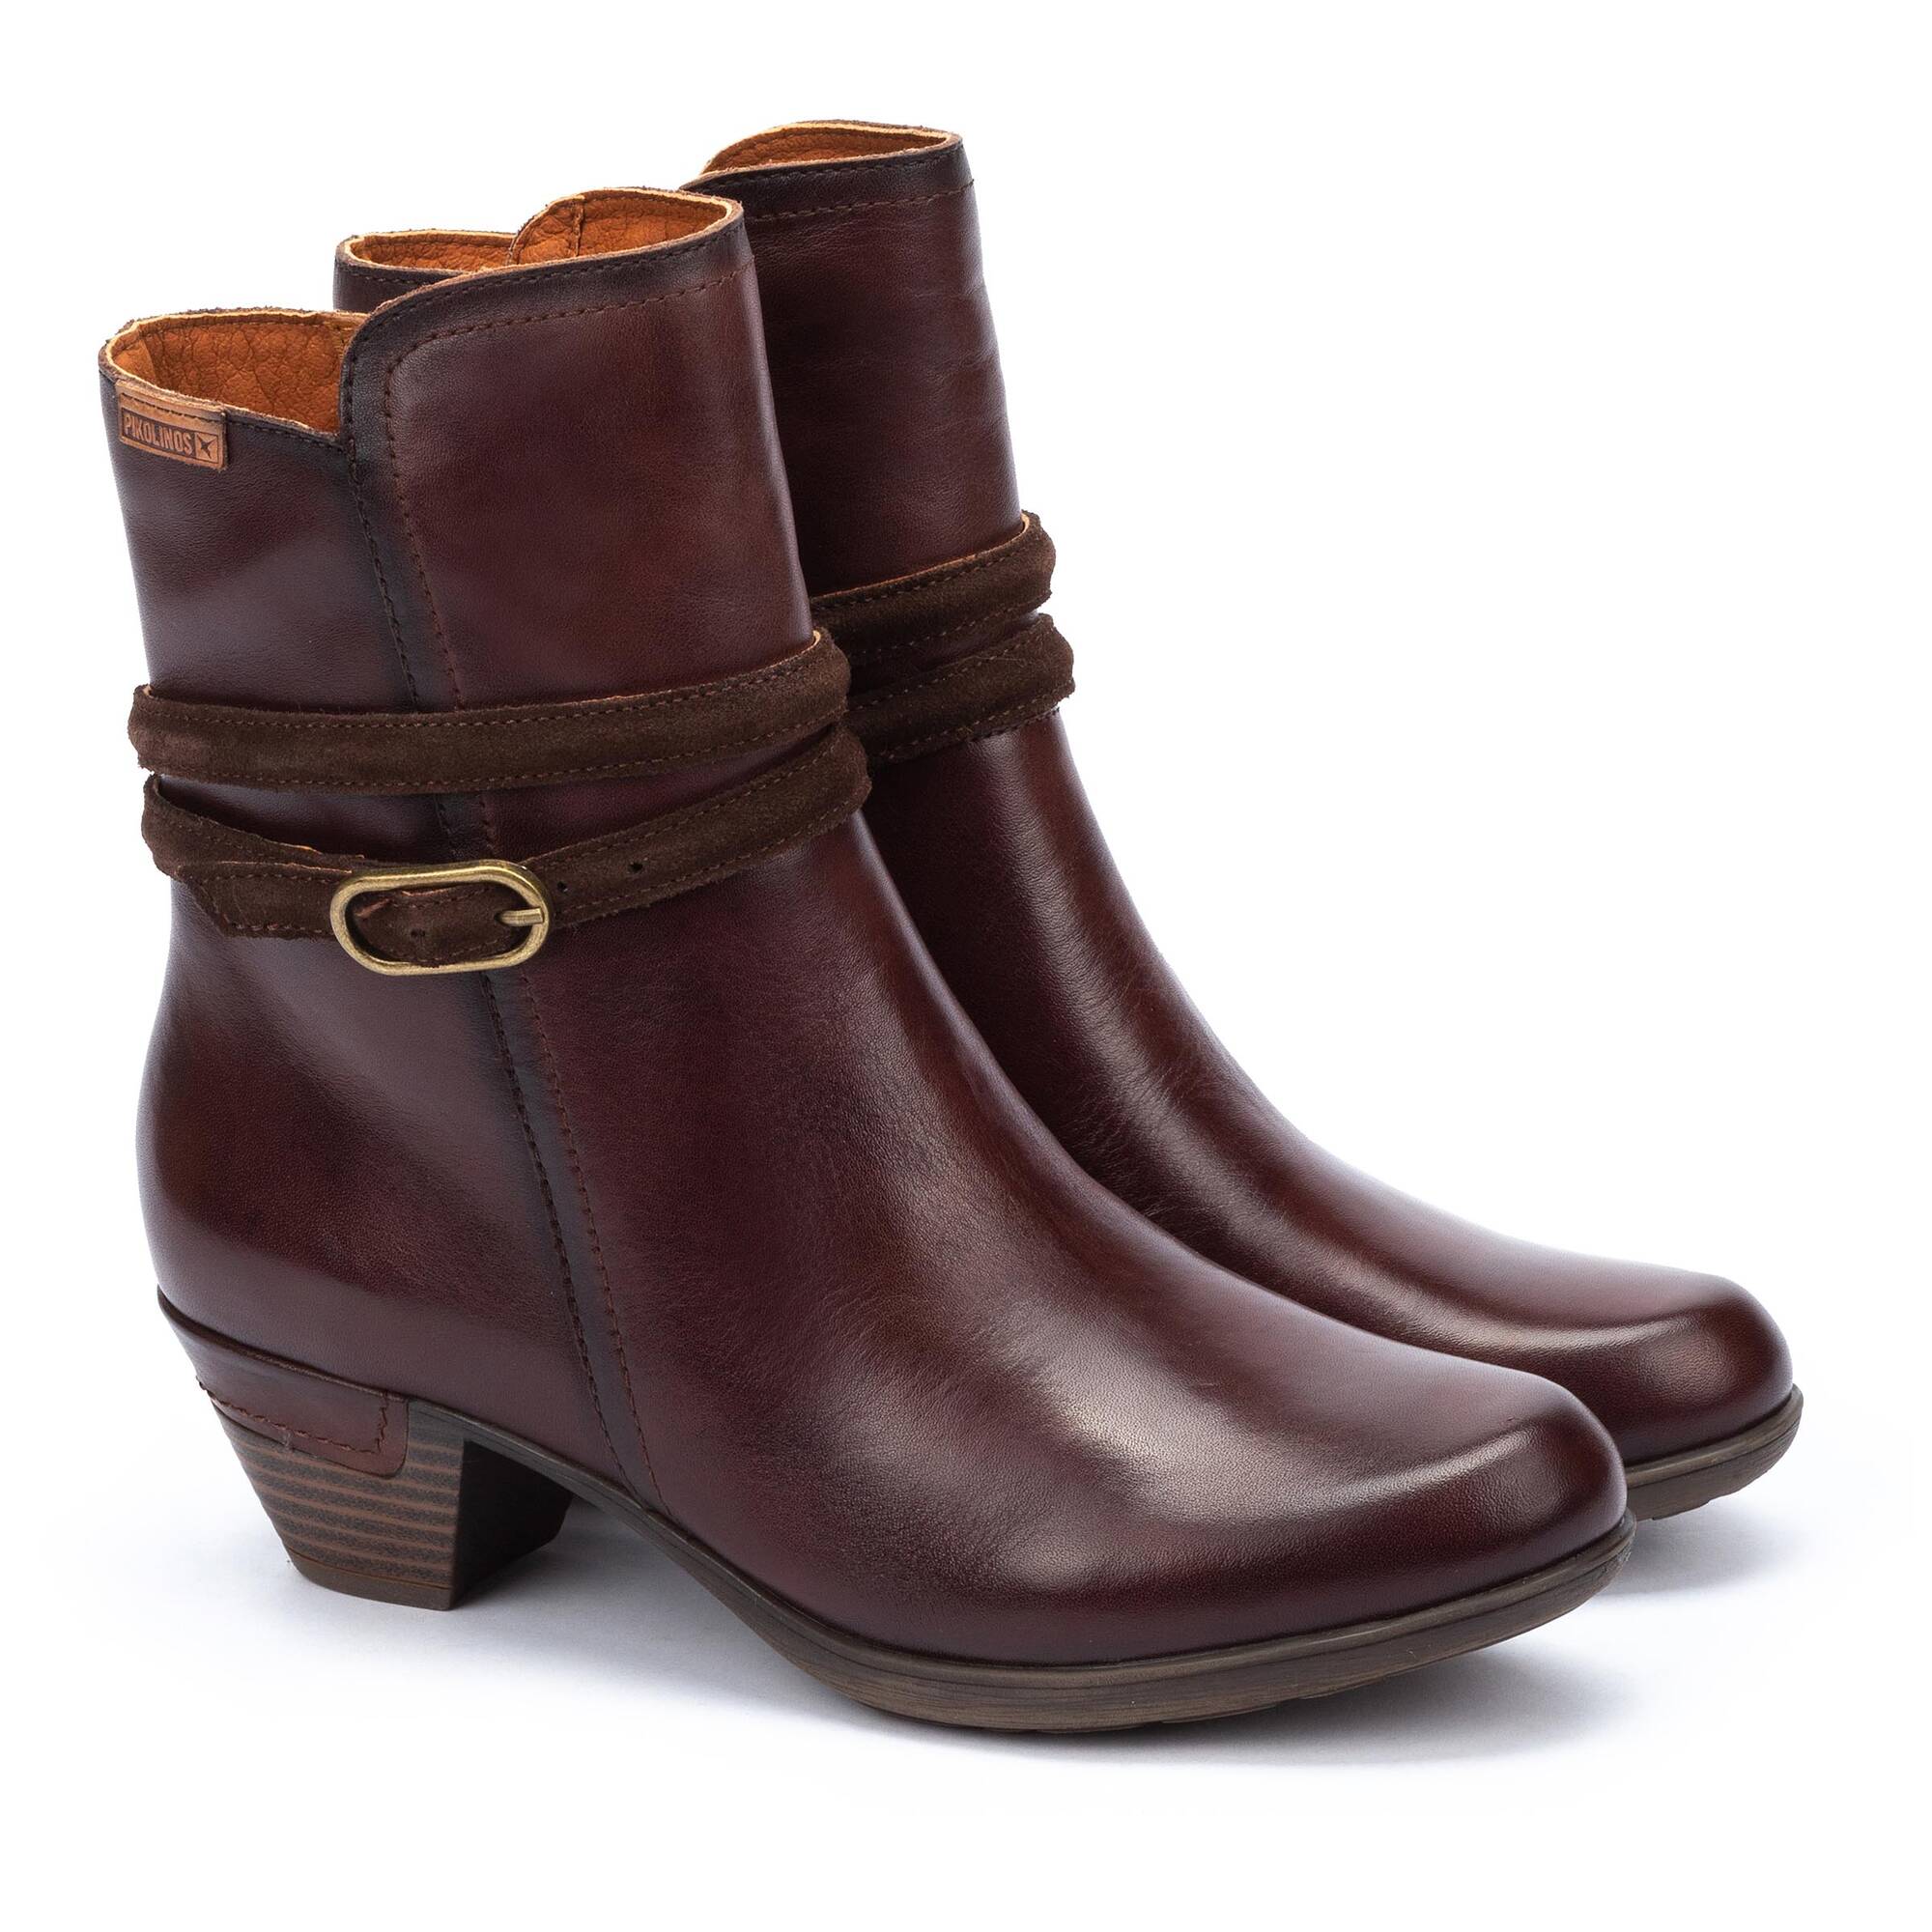 Ankle boots | ROTTERDAM 902-8589, CAOBA, large image number 20 | null